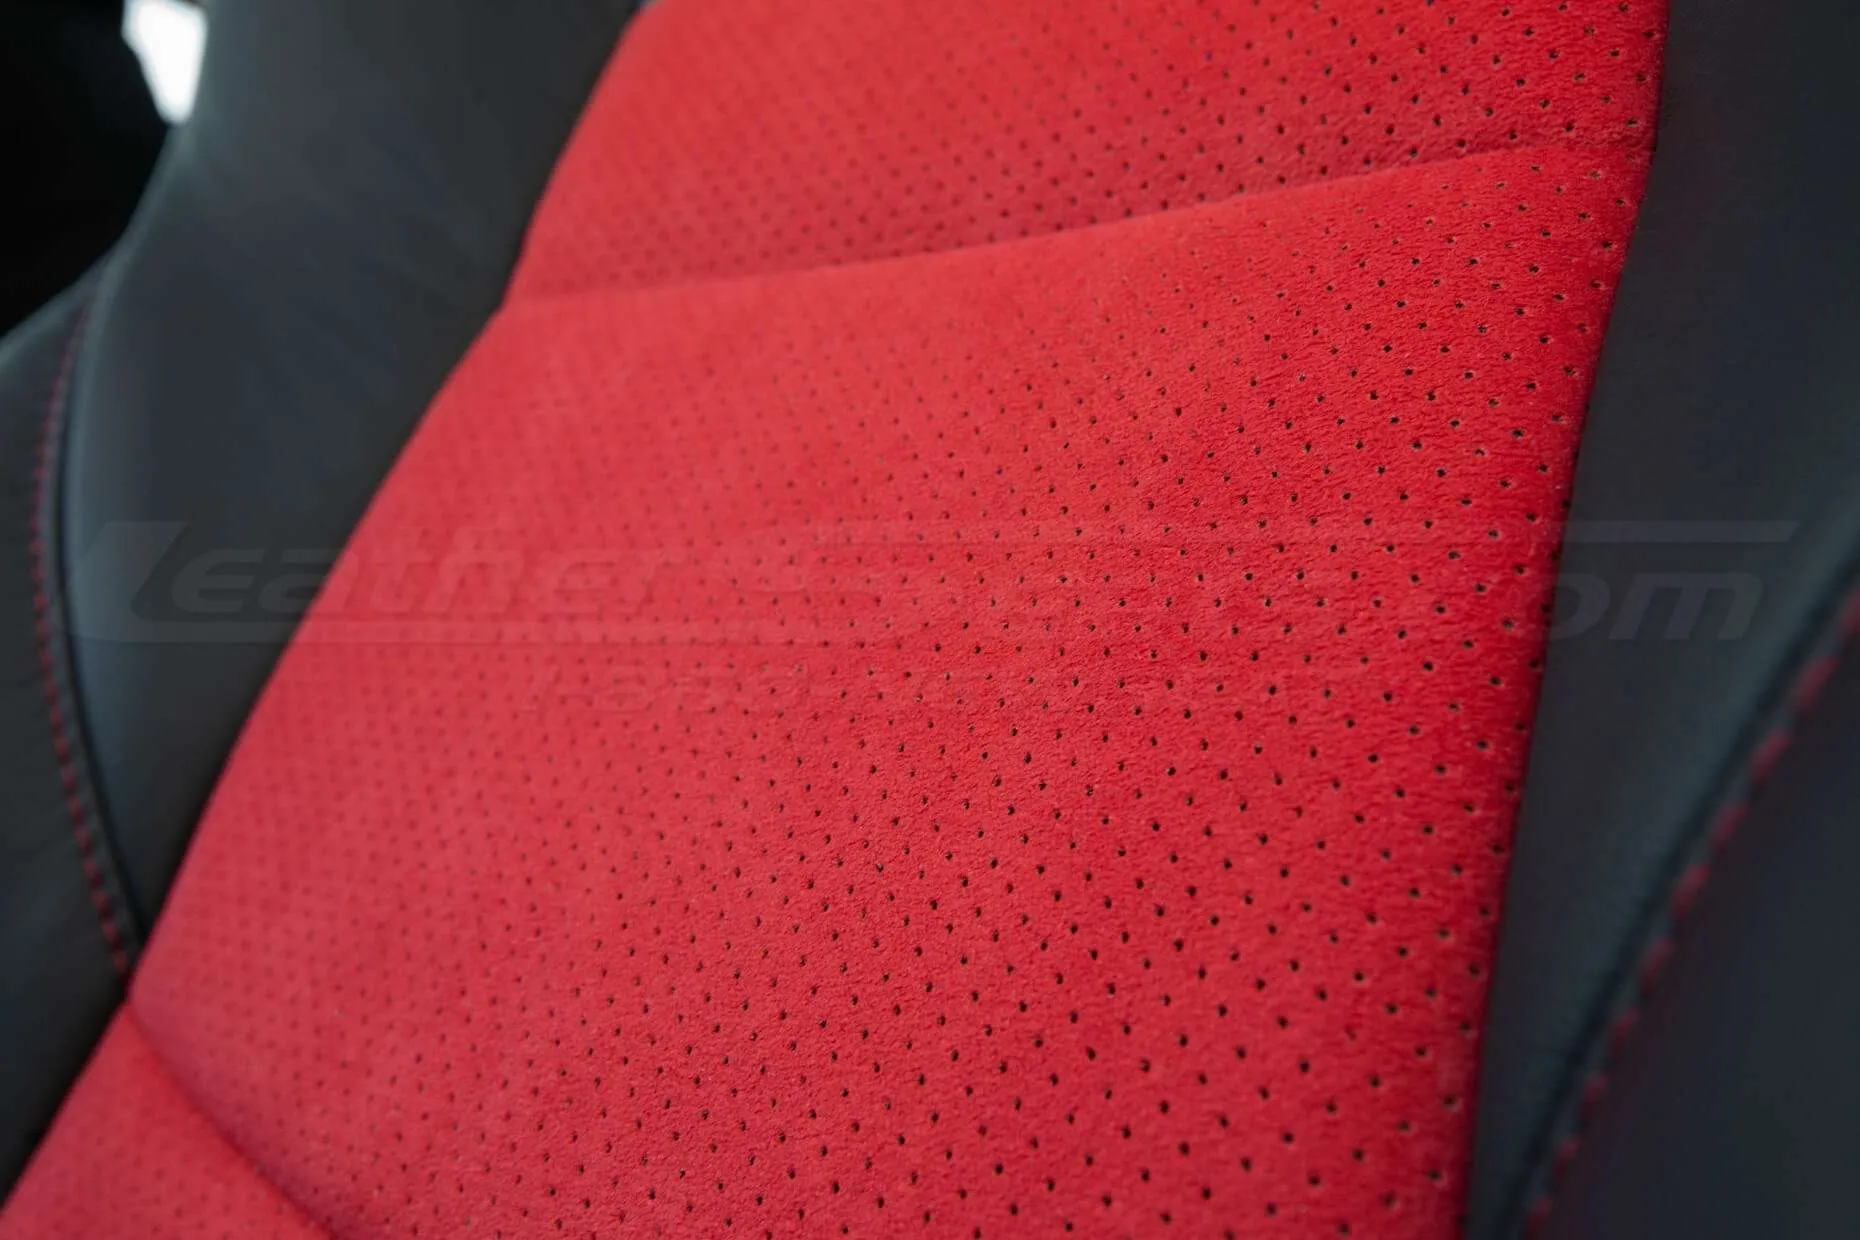 Nissan 370Z Leather Seats - Black & Red Suede - Installed - Perforated Suede